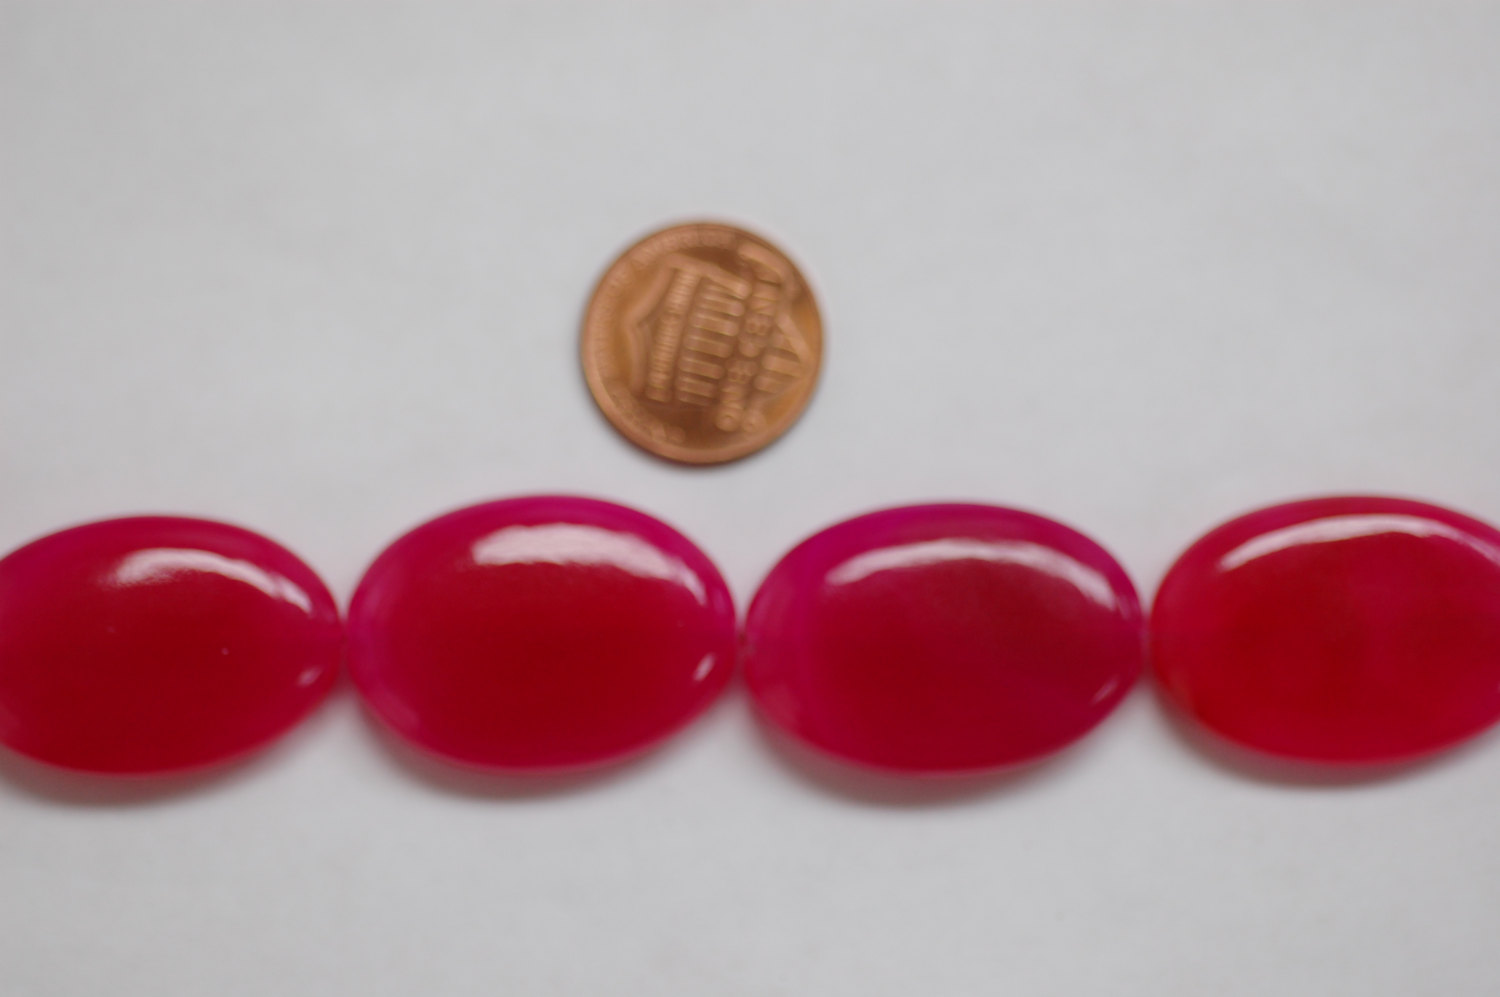 Hot Pink Oval Chalcedony One side Faceted/One side Smooth